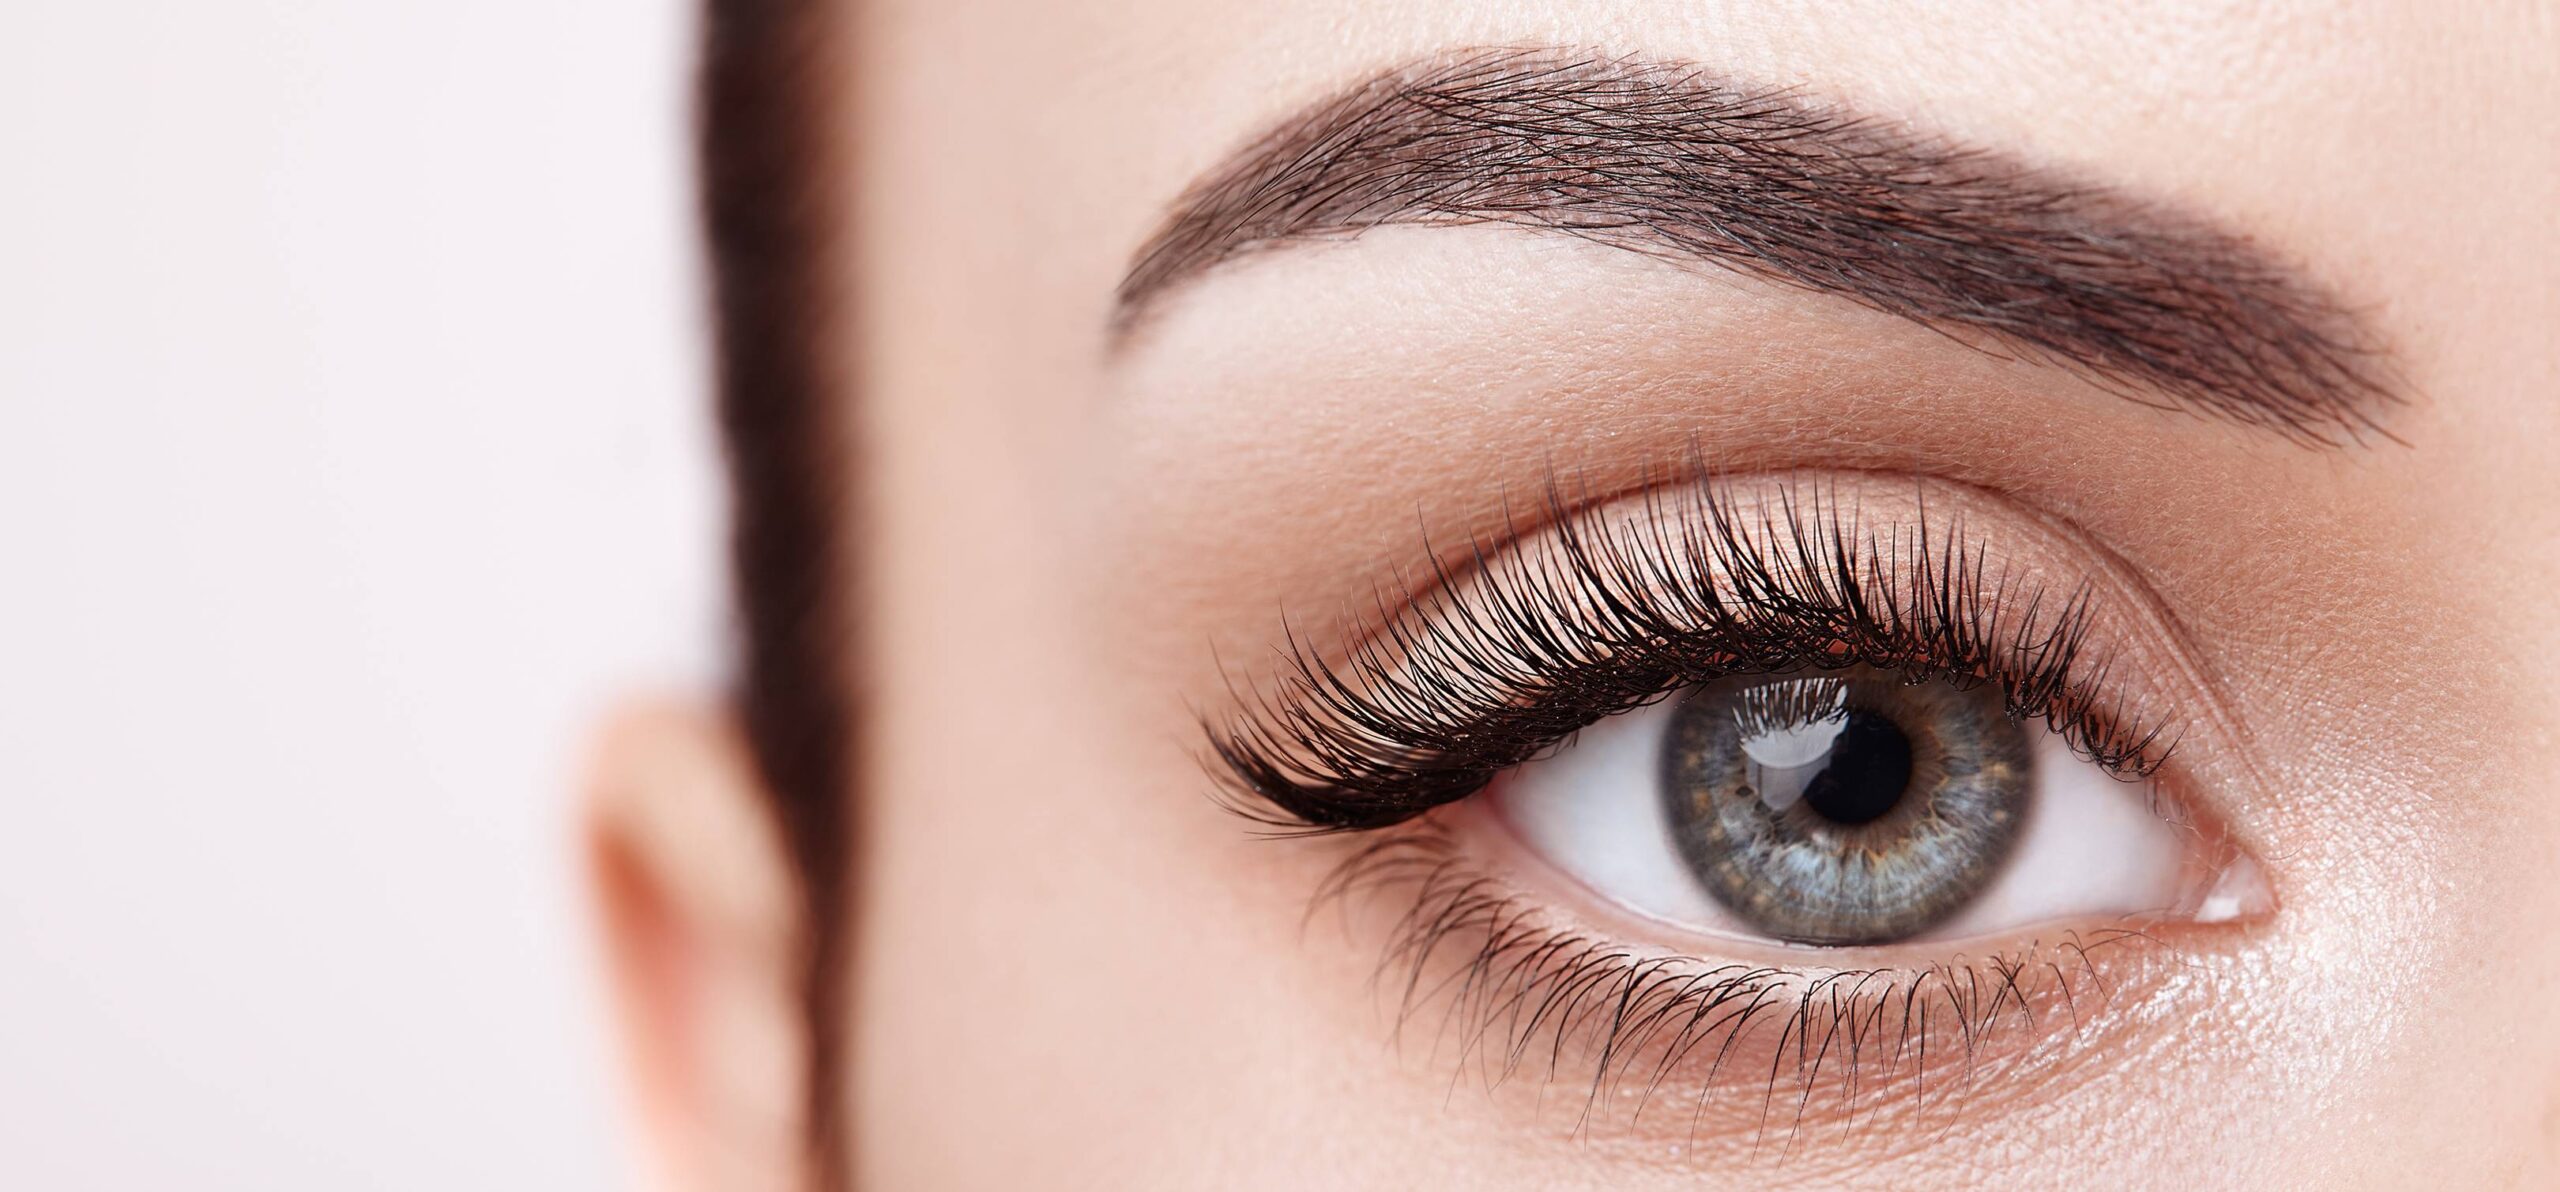 5 Amazing Tips To Get Your Dream Long Lashes